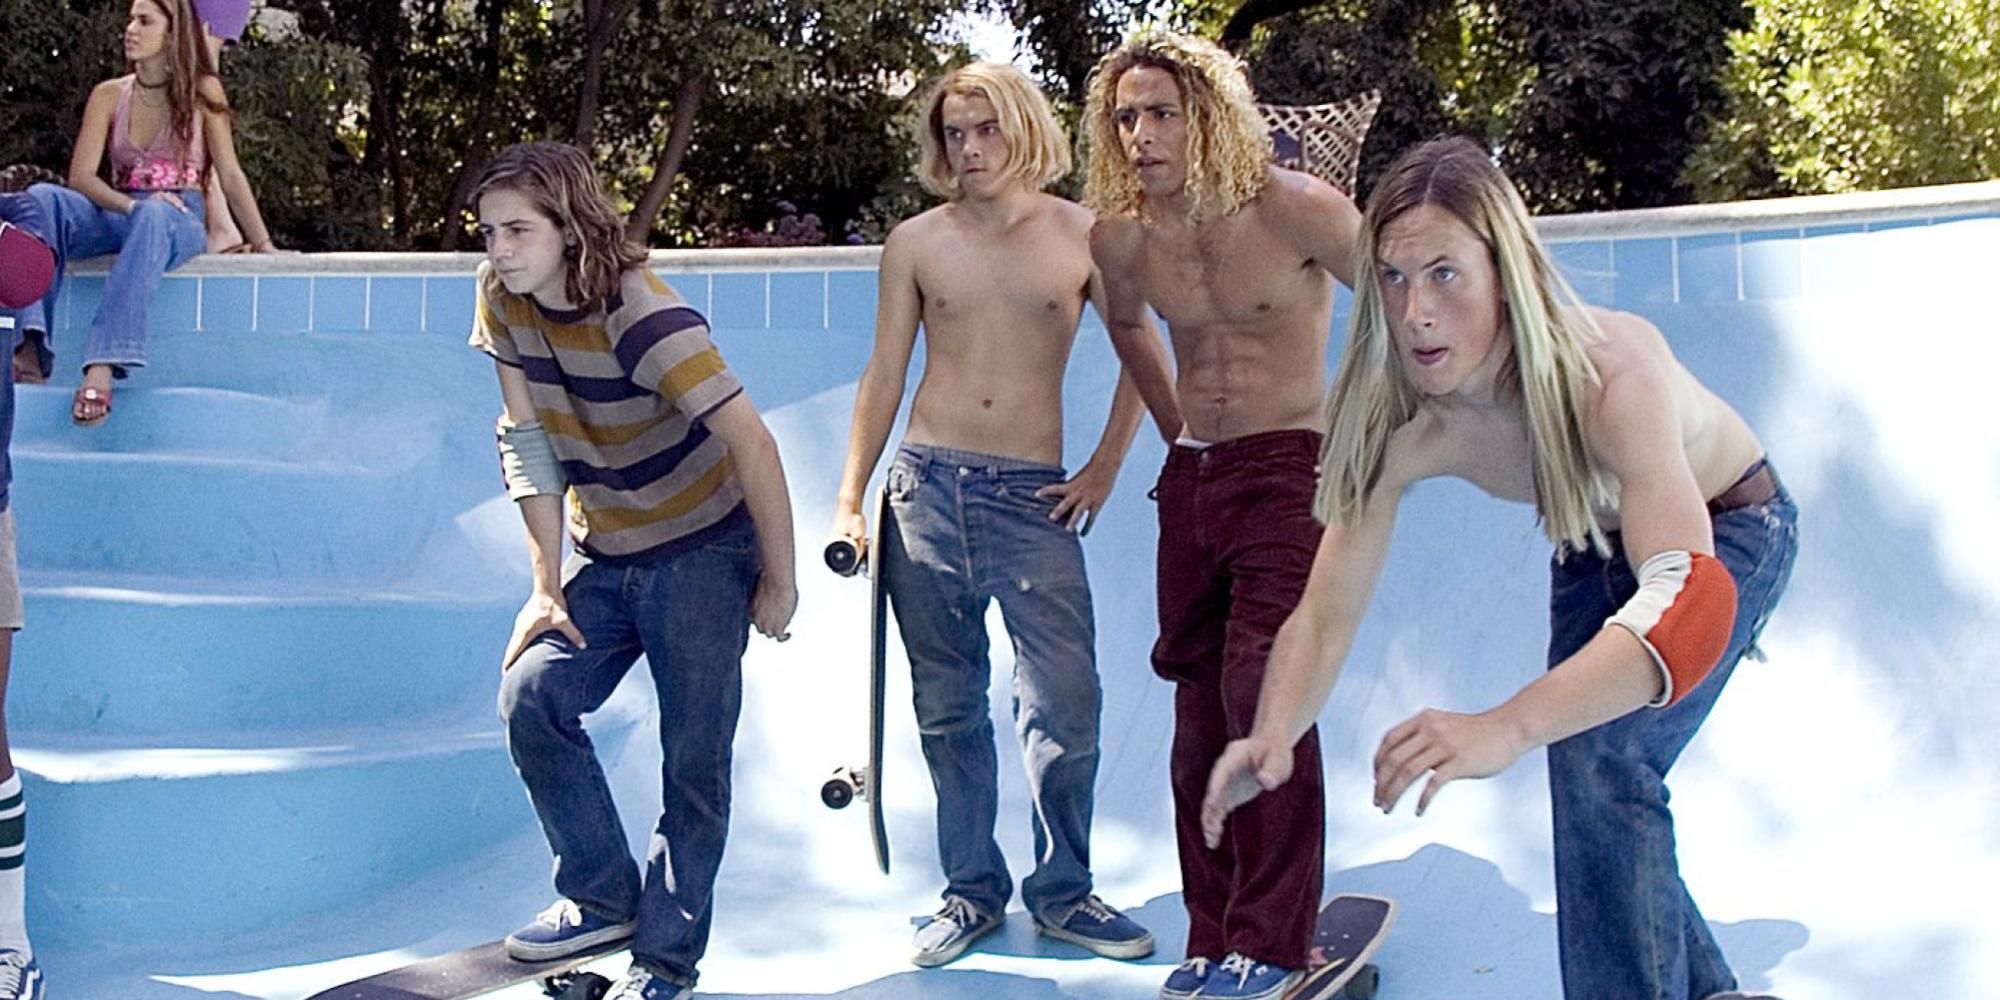 Skaters in an empty pool in Lords of Dogtown